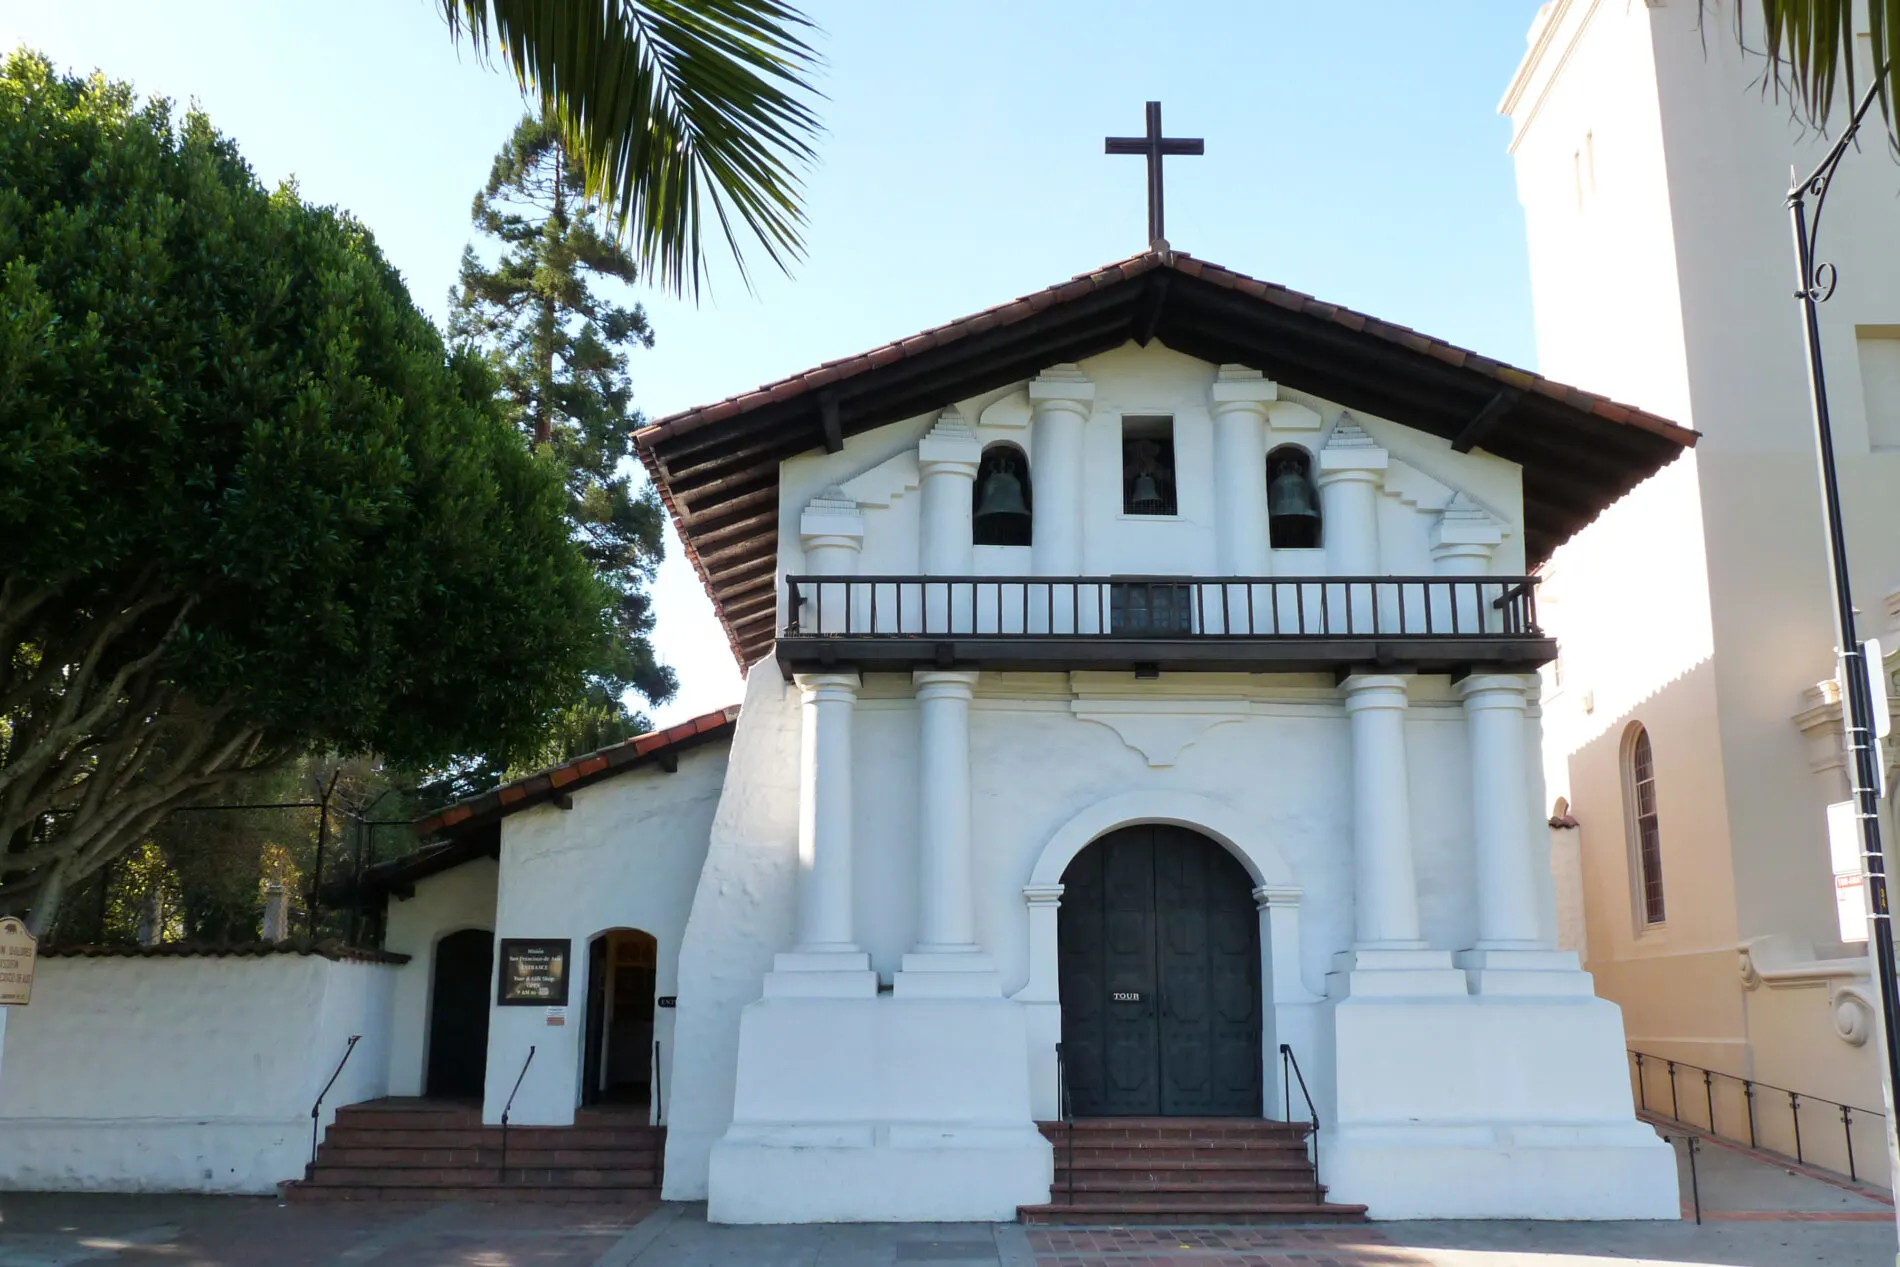 San Francisco de Asís, also called Mission Dolores, was built in 1776. It is the oldest surviving building in San Francisco.